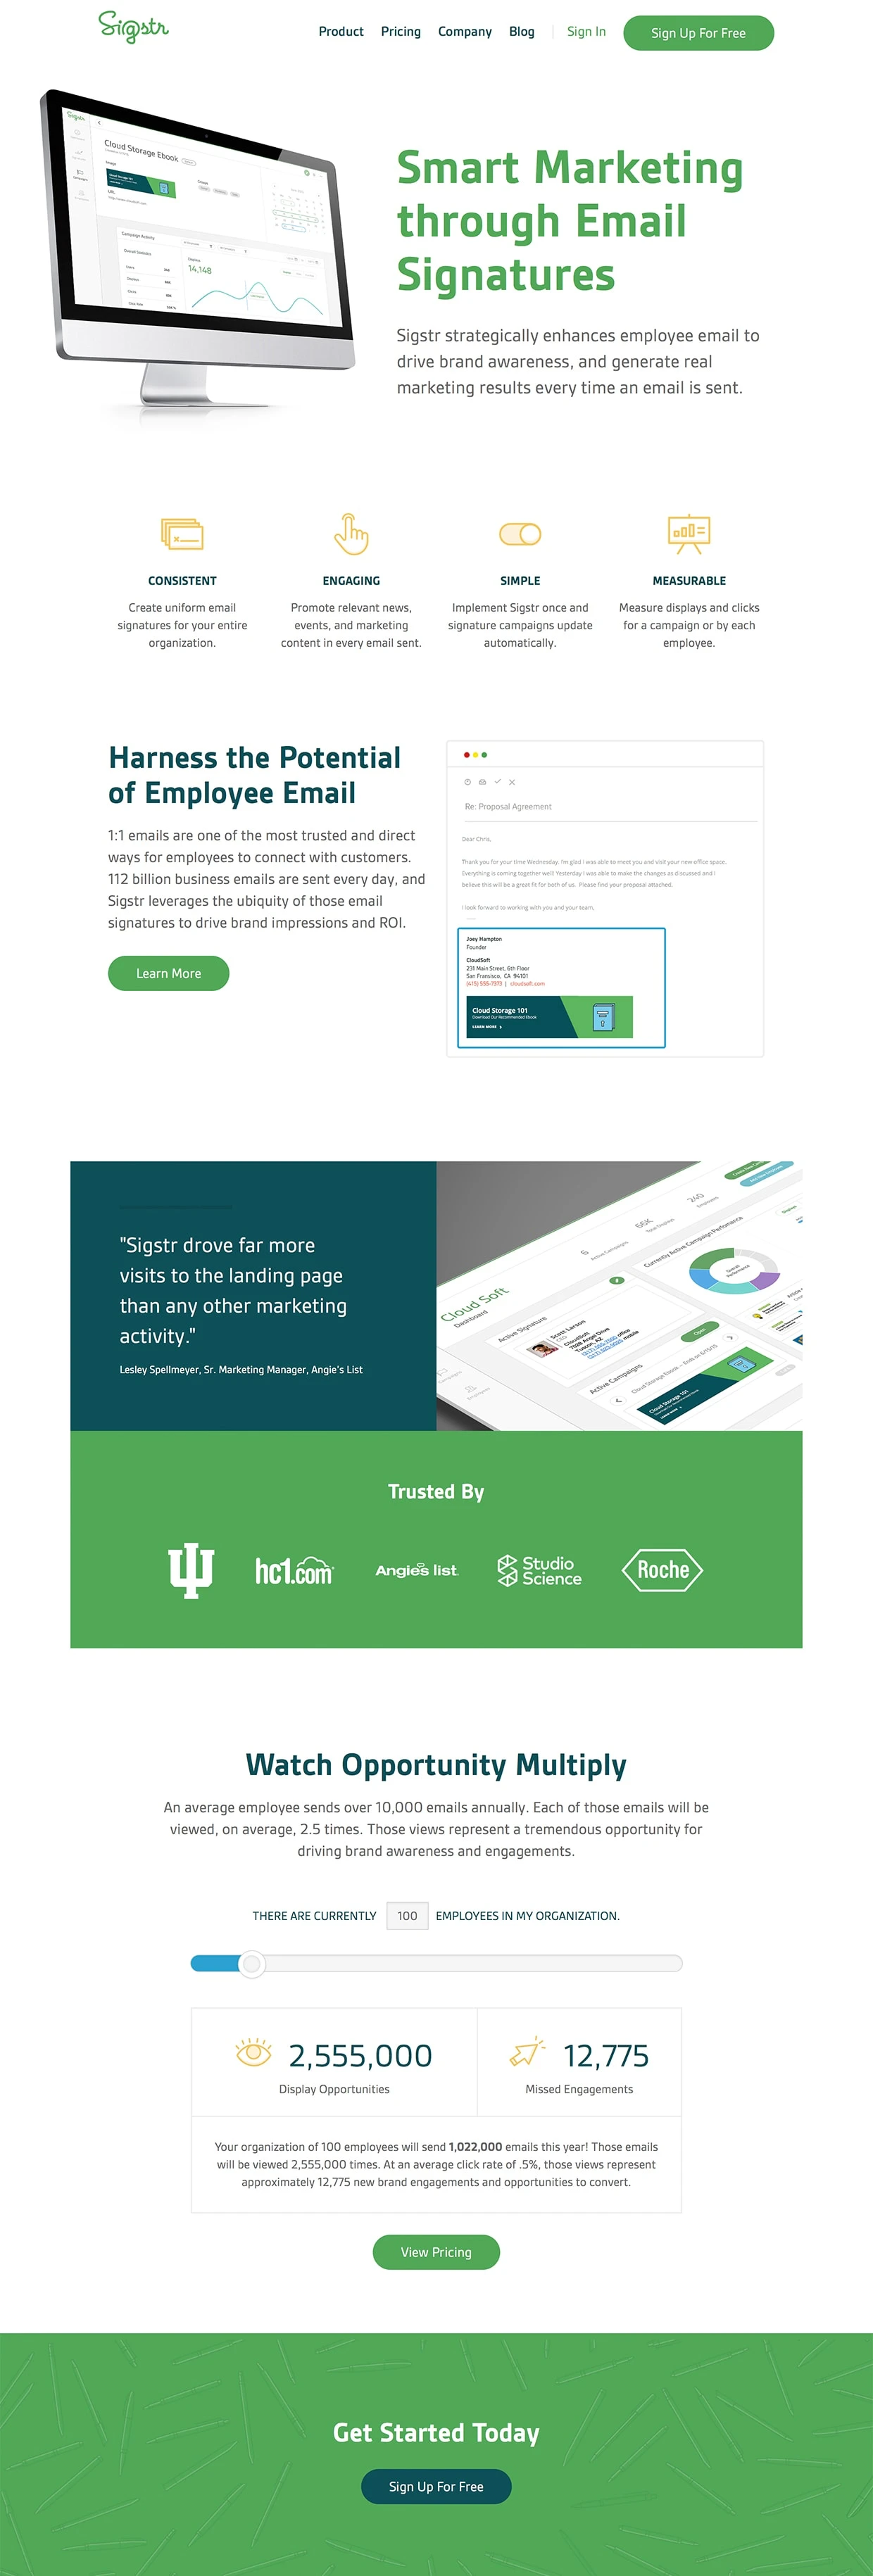 Sigstr Landing Page Example: Smart Marketing through Email Signatures